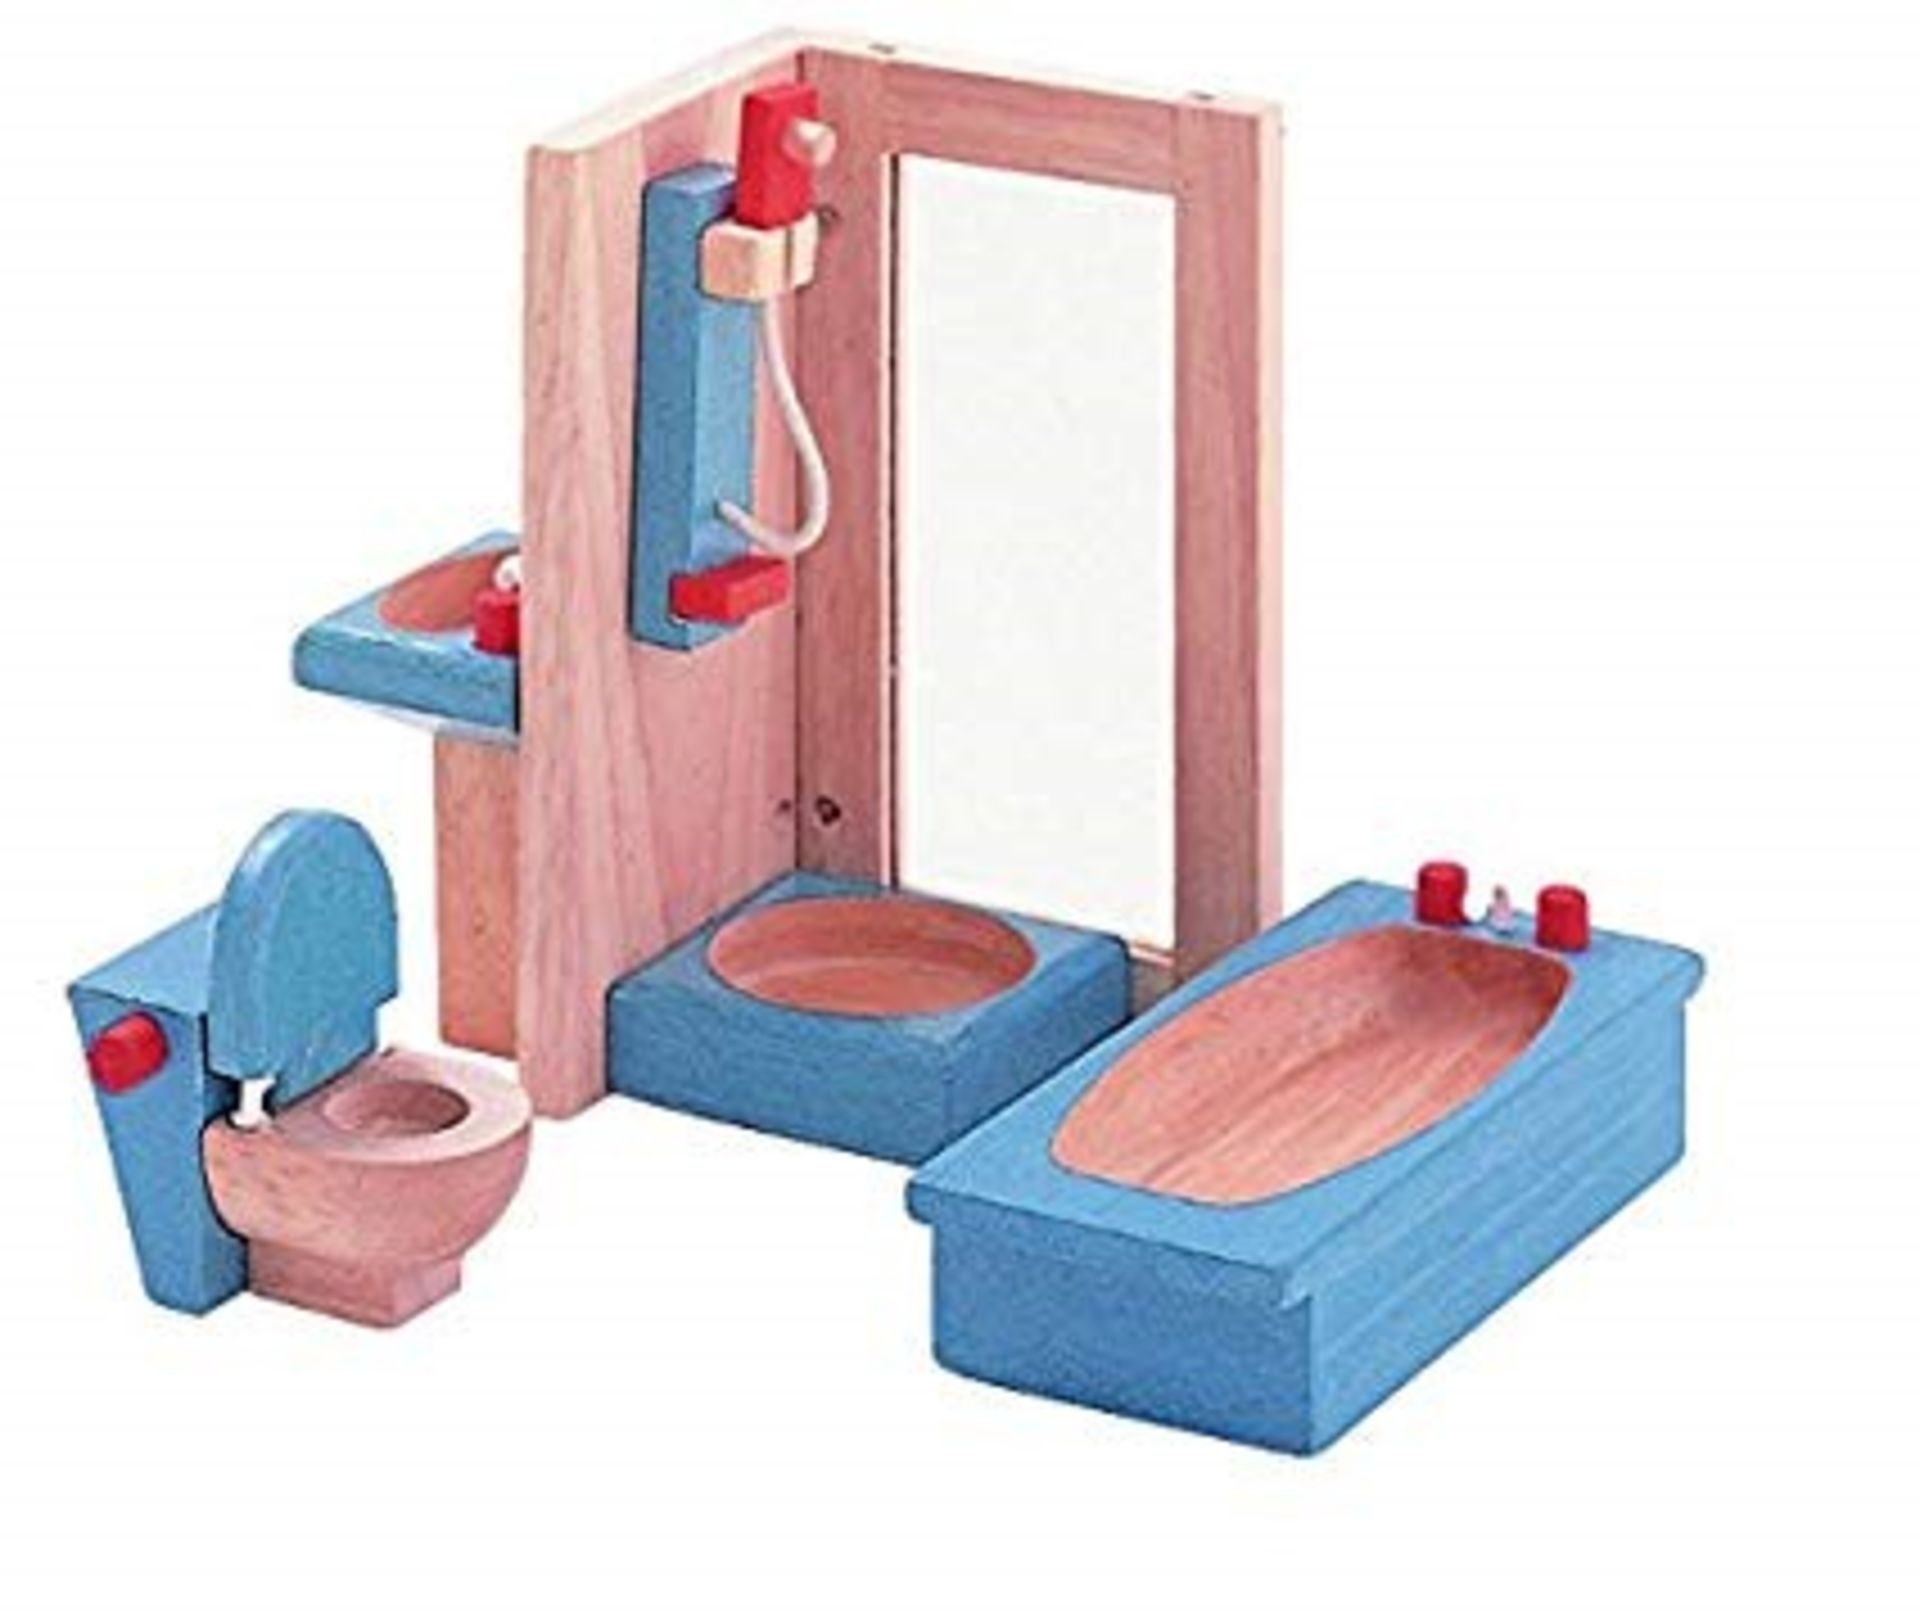 1 BRAND NEW BOXED PLAN TOYS BATHROOM PLAY SET / RRP £21.99 (VIEWING HIGHLY RECOMMENDED)